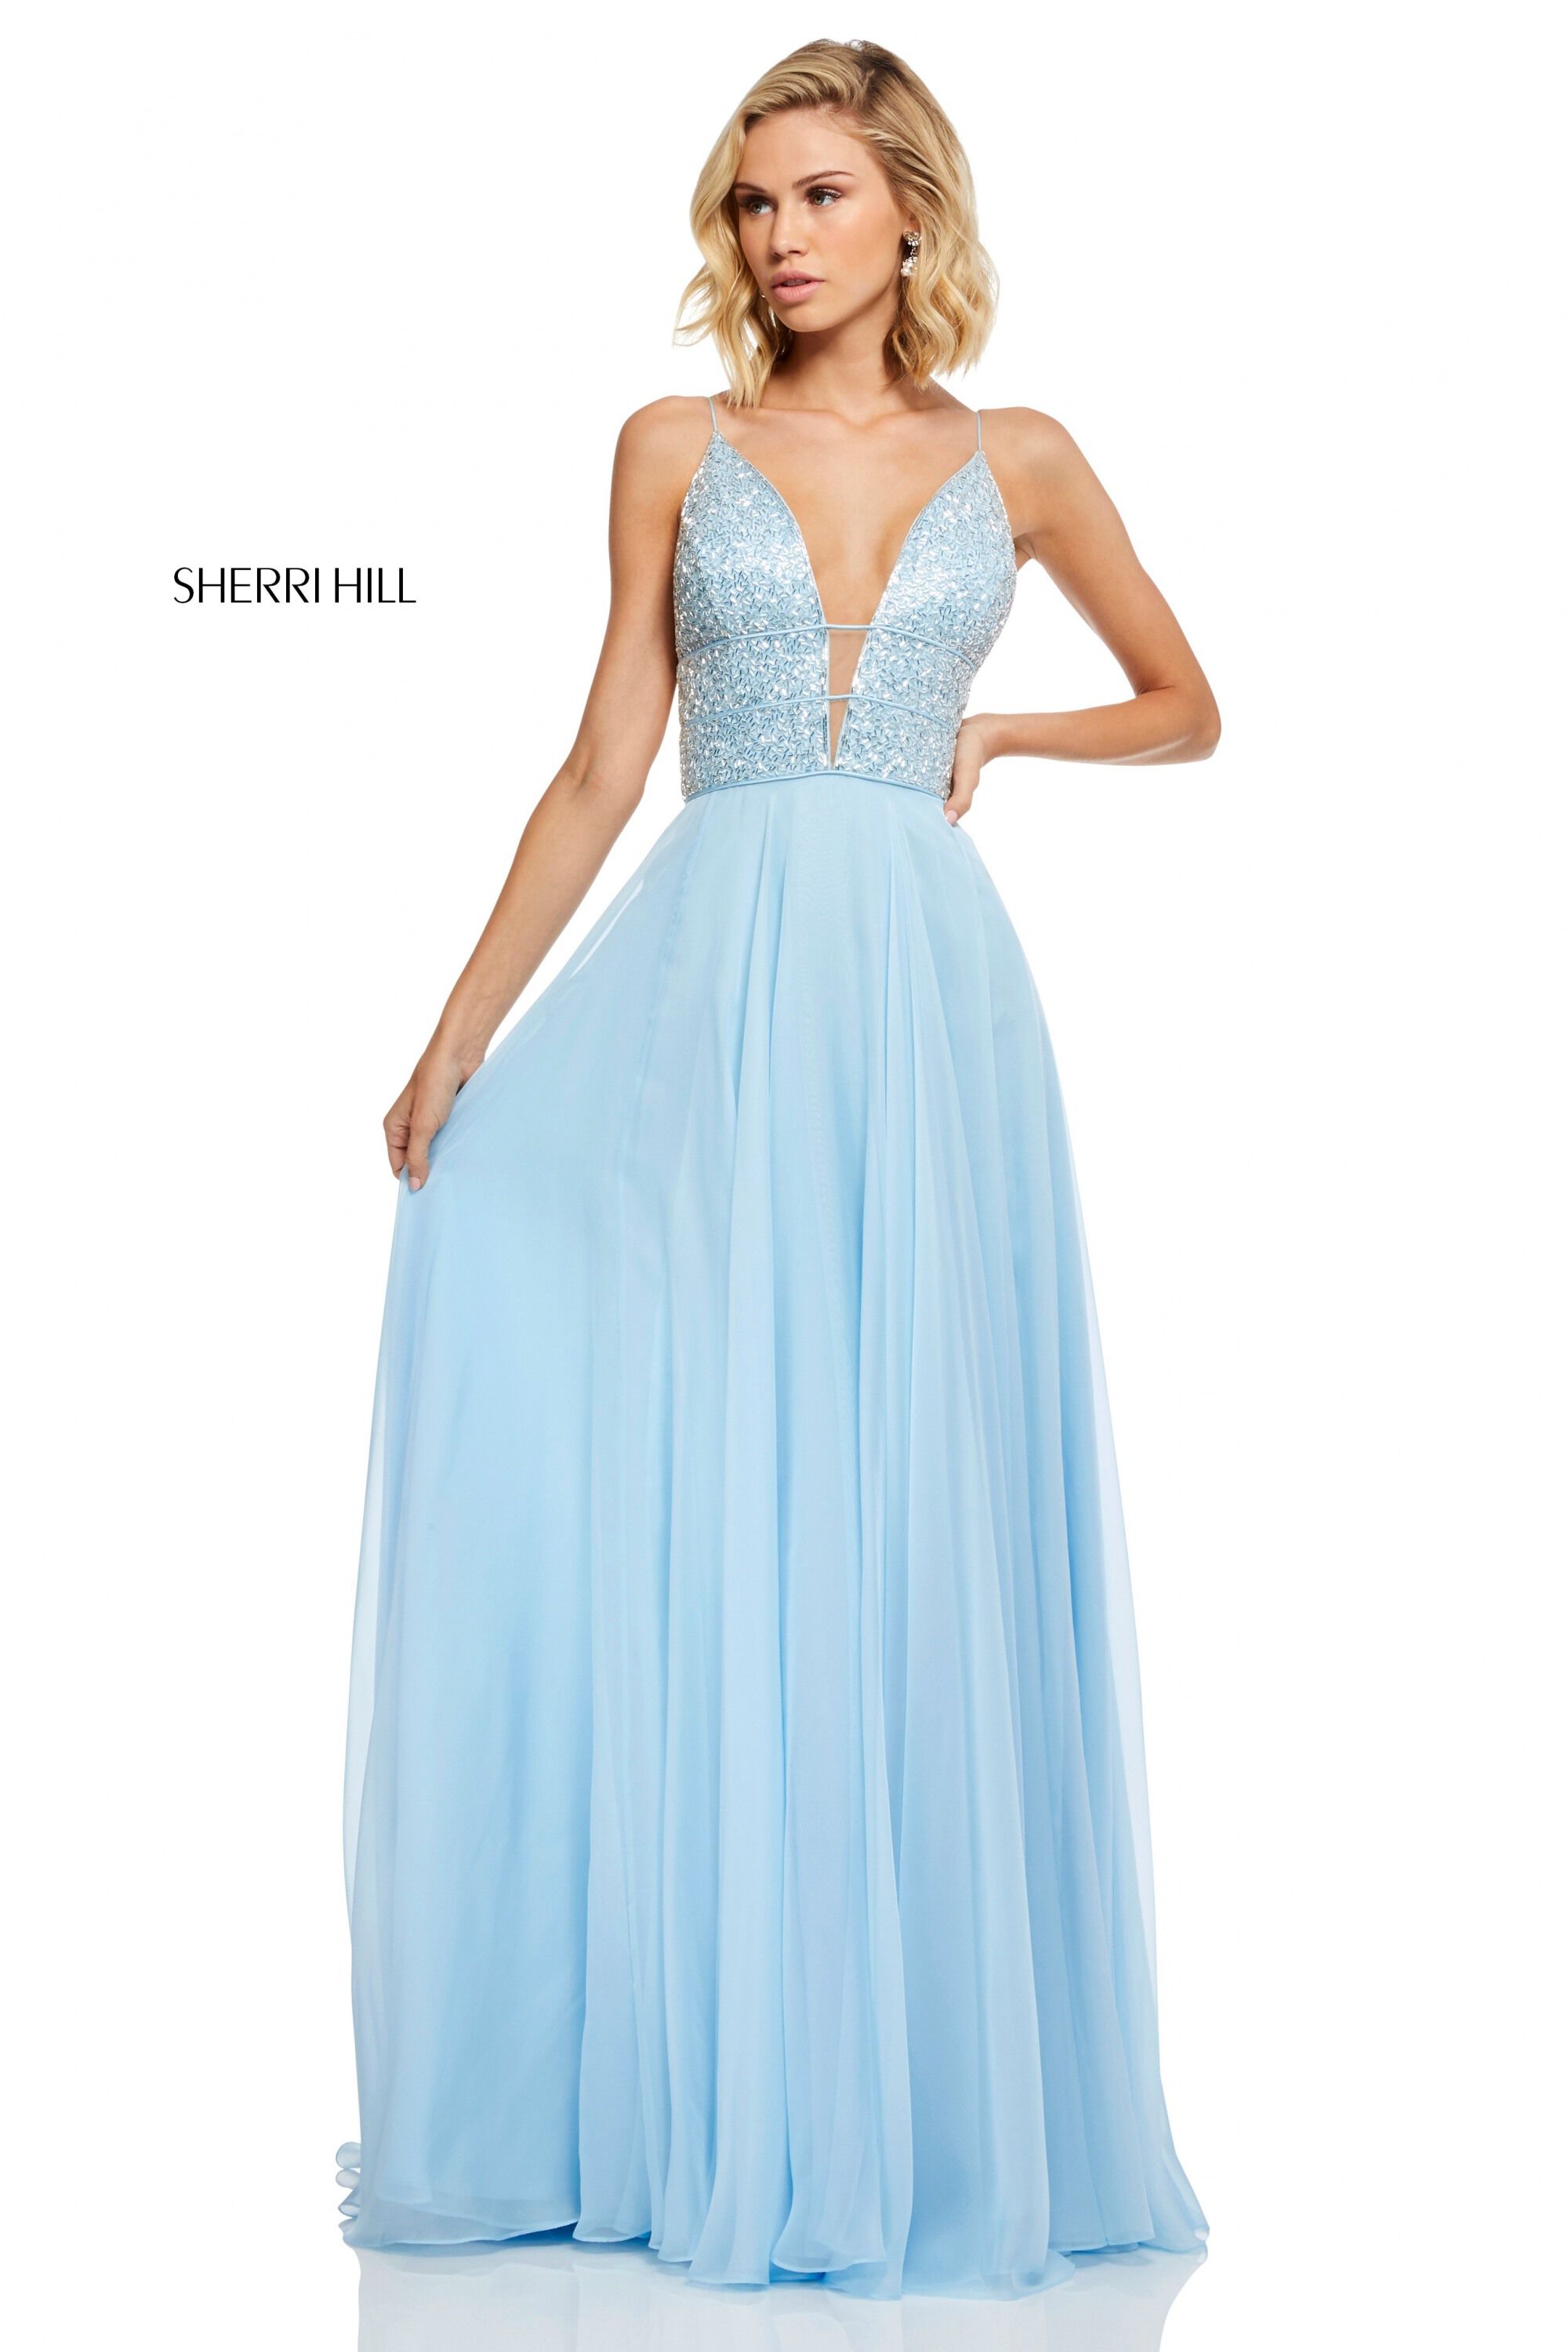 style № 52589 designed by SherriHill